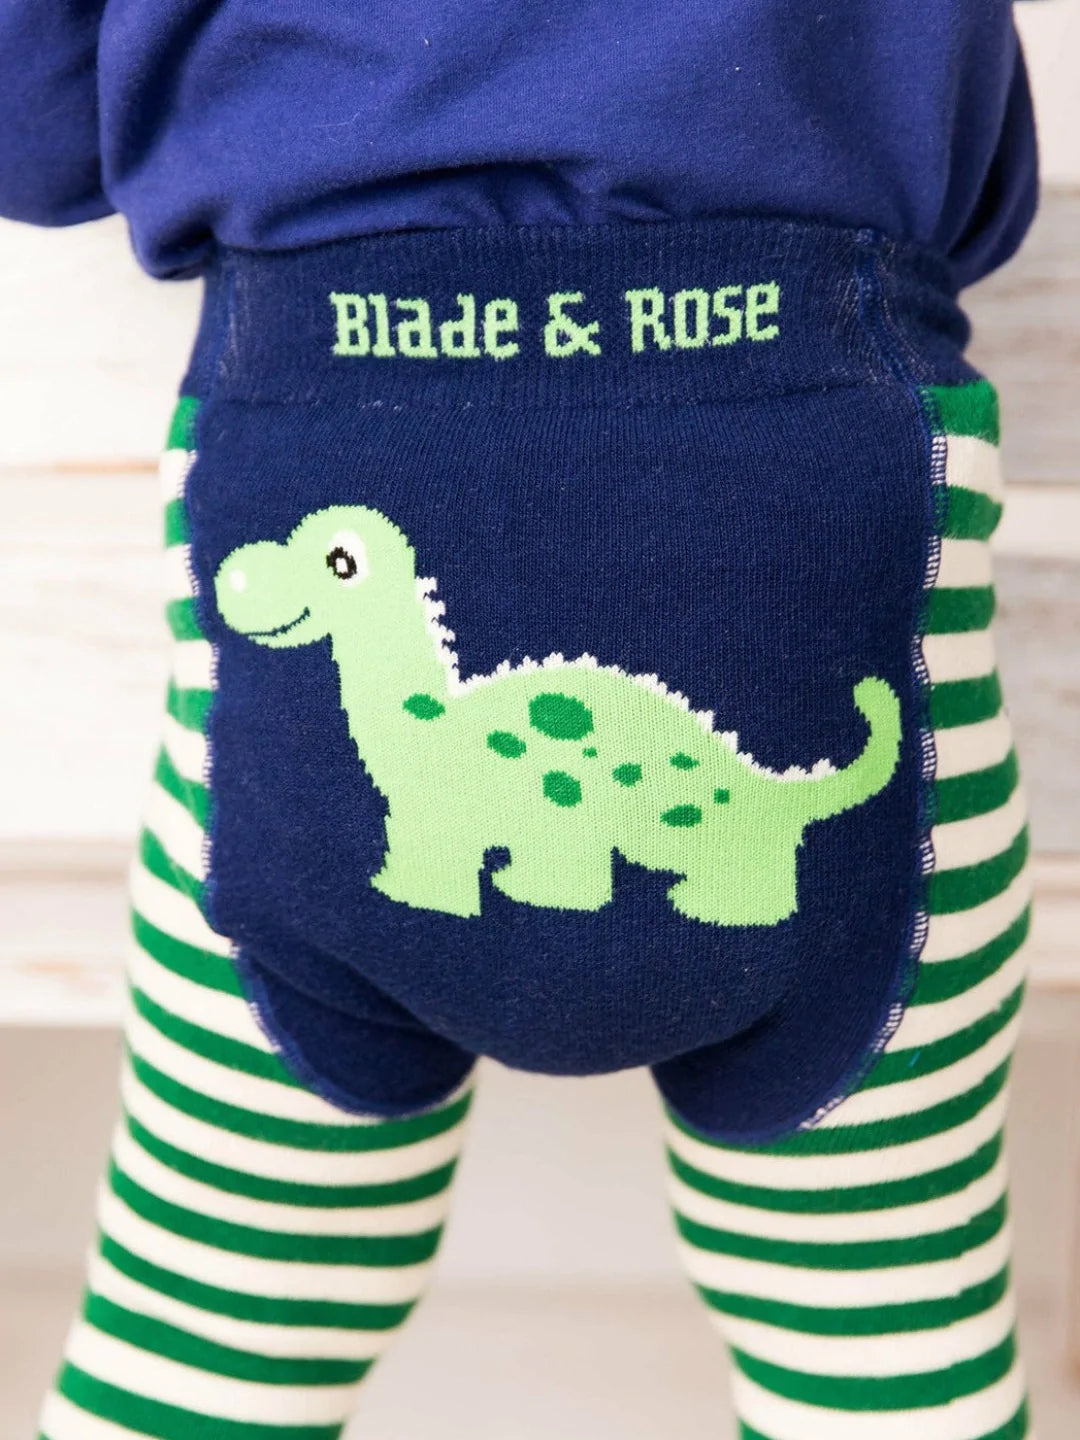 blade & rose maple the diplodocus leggings at whippersnappers